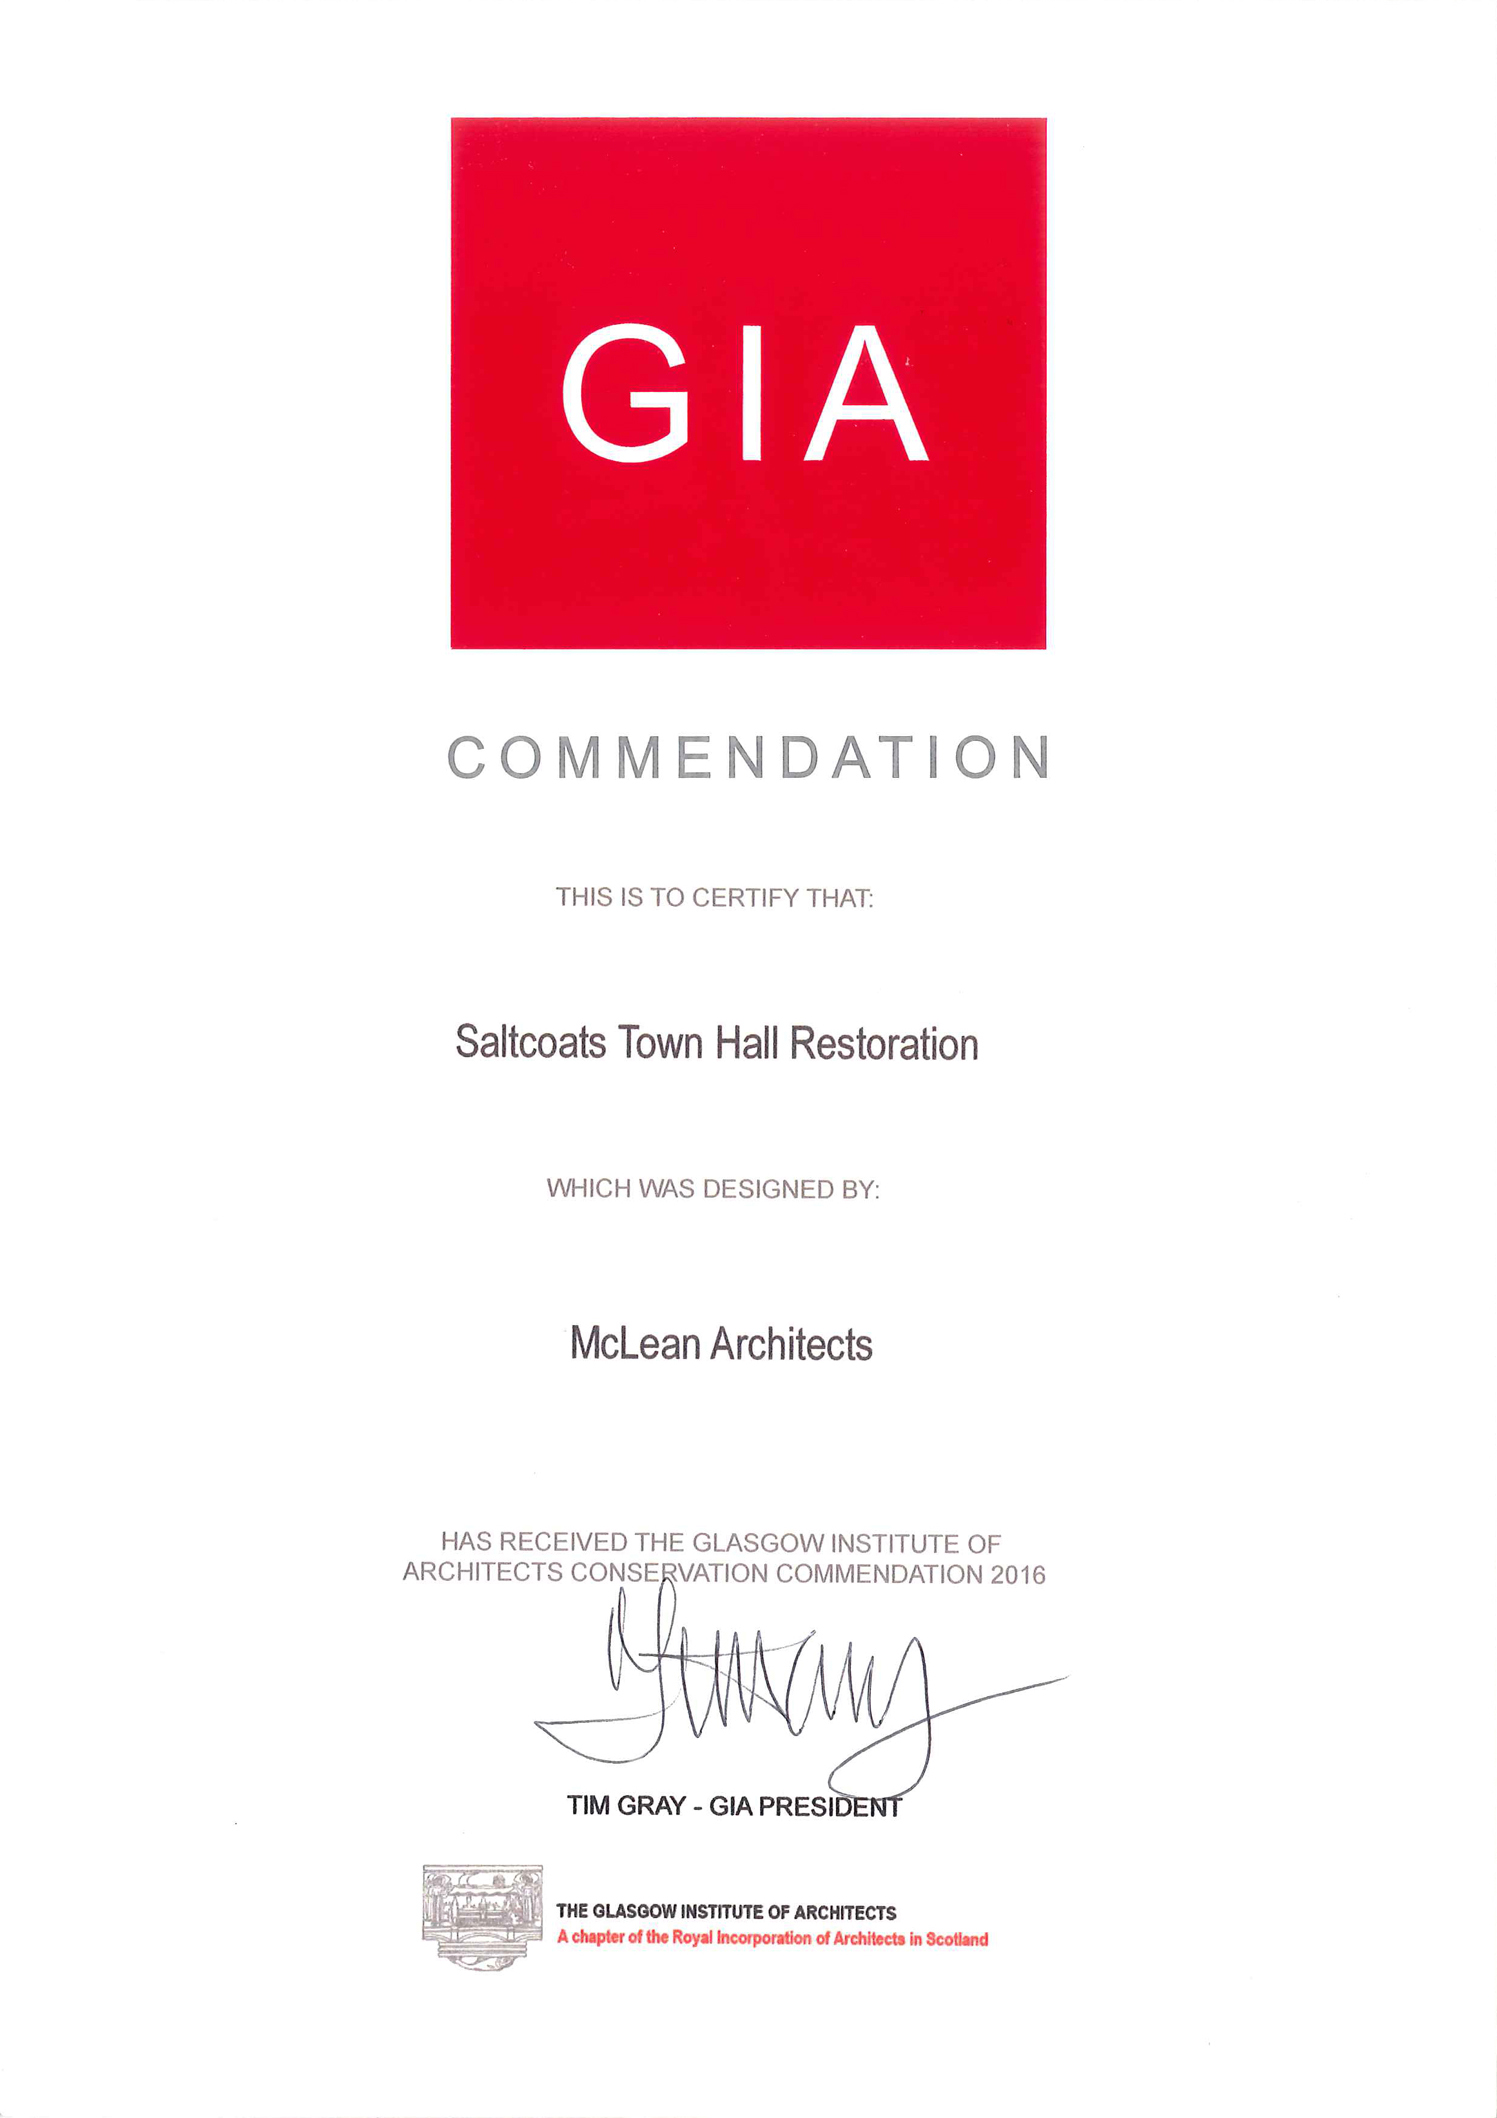 GIA Conservation Commendation 2016